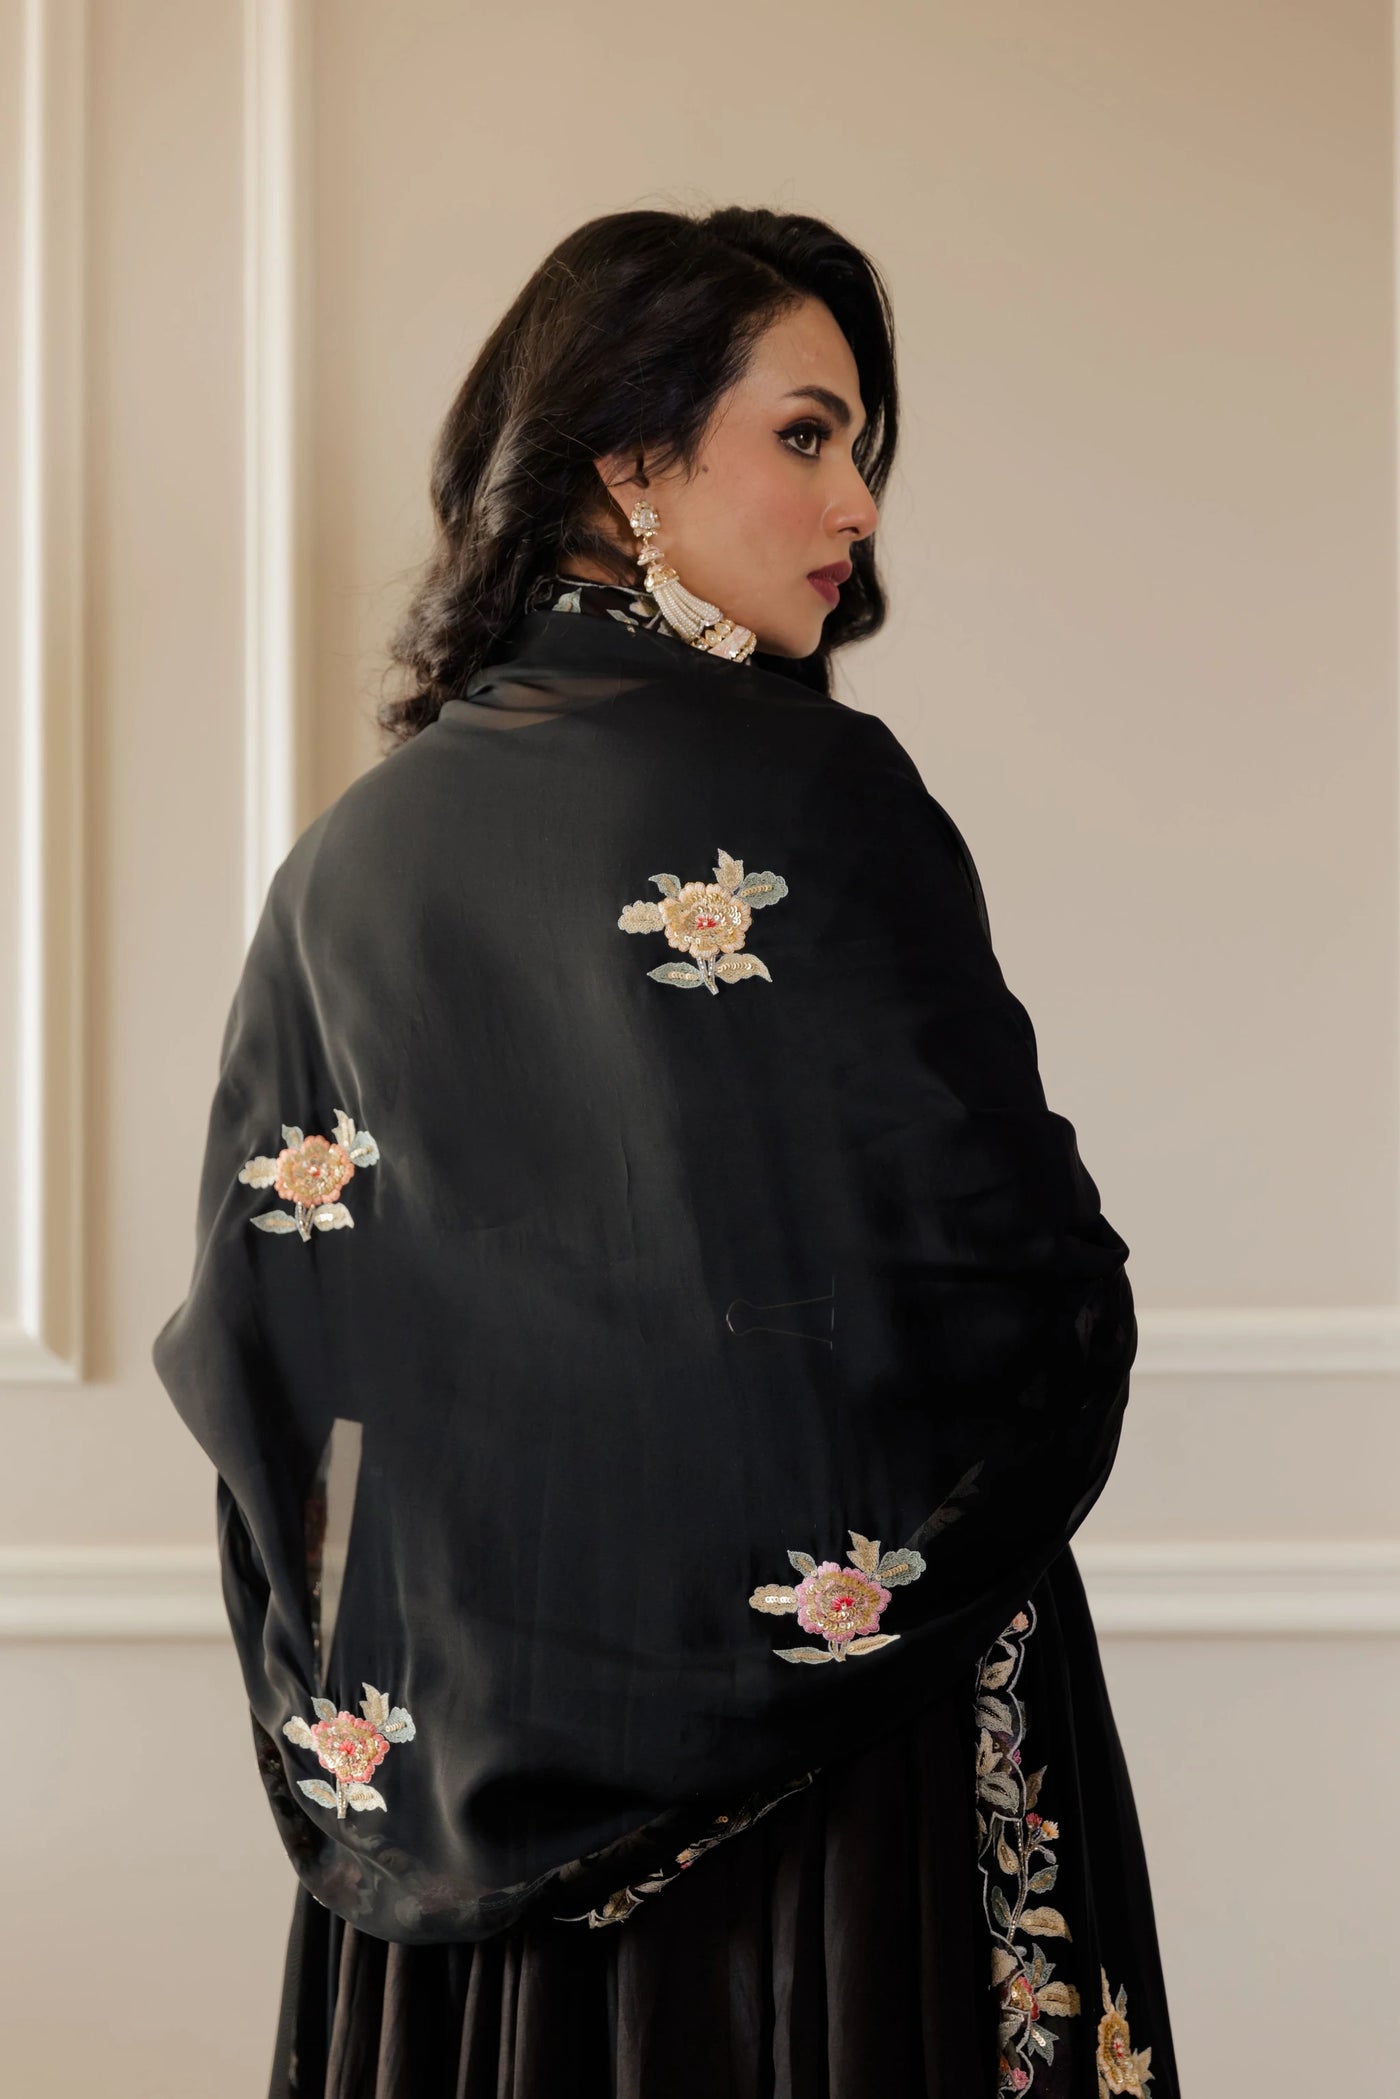 Black Kali Anarkali Set Indian Clothing in Denver, CO, Aurora, CO, Boulder, CO, Fort Collins, CO, Colorado Springs, CO, Parker, CO, Highlands Ranch, CO, Cherry Creek, CO, Centennial, CO, and Longmont, CO. NATIONWIDE SHIPPING USA- India Fashion X